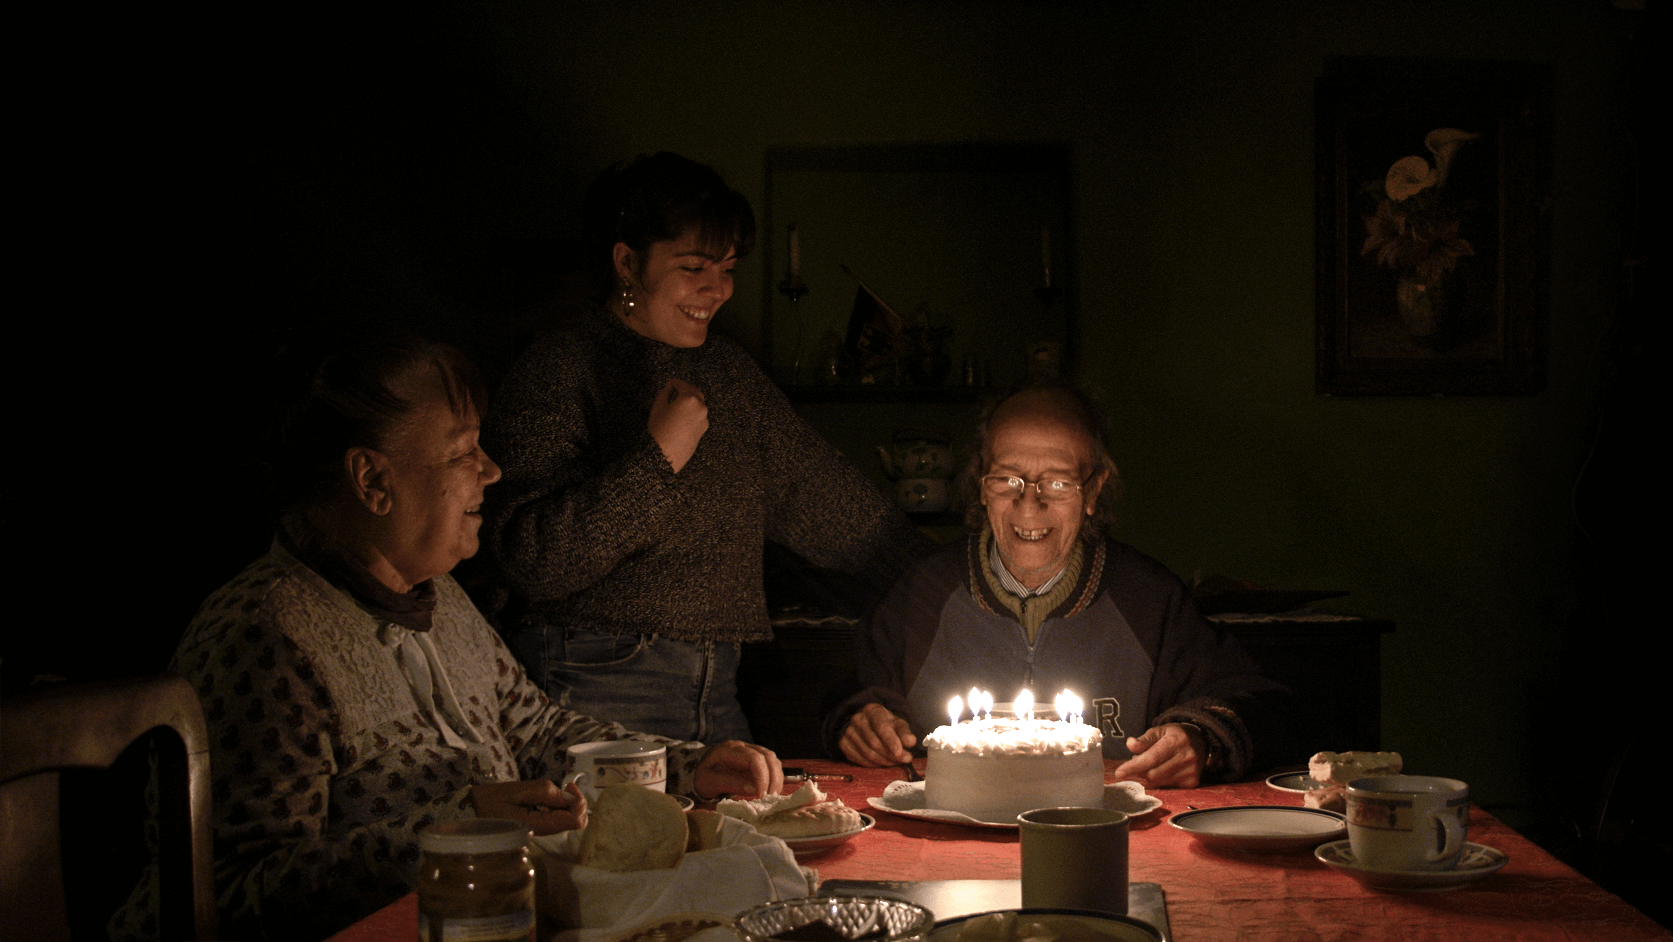 Director Gabriela Pena at her grandfather’s birthday with her grandmother and a cake with candles.